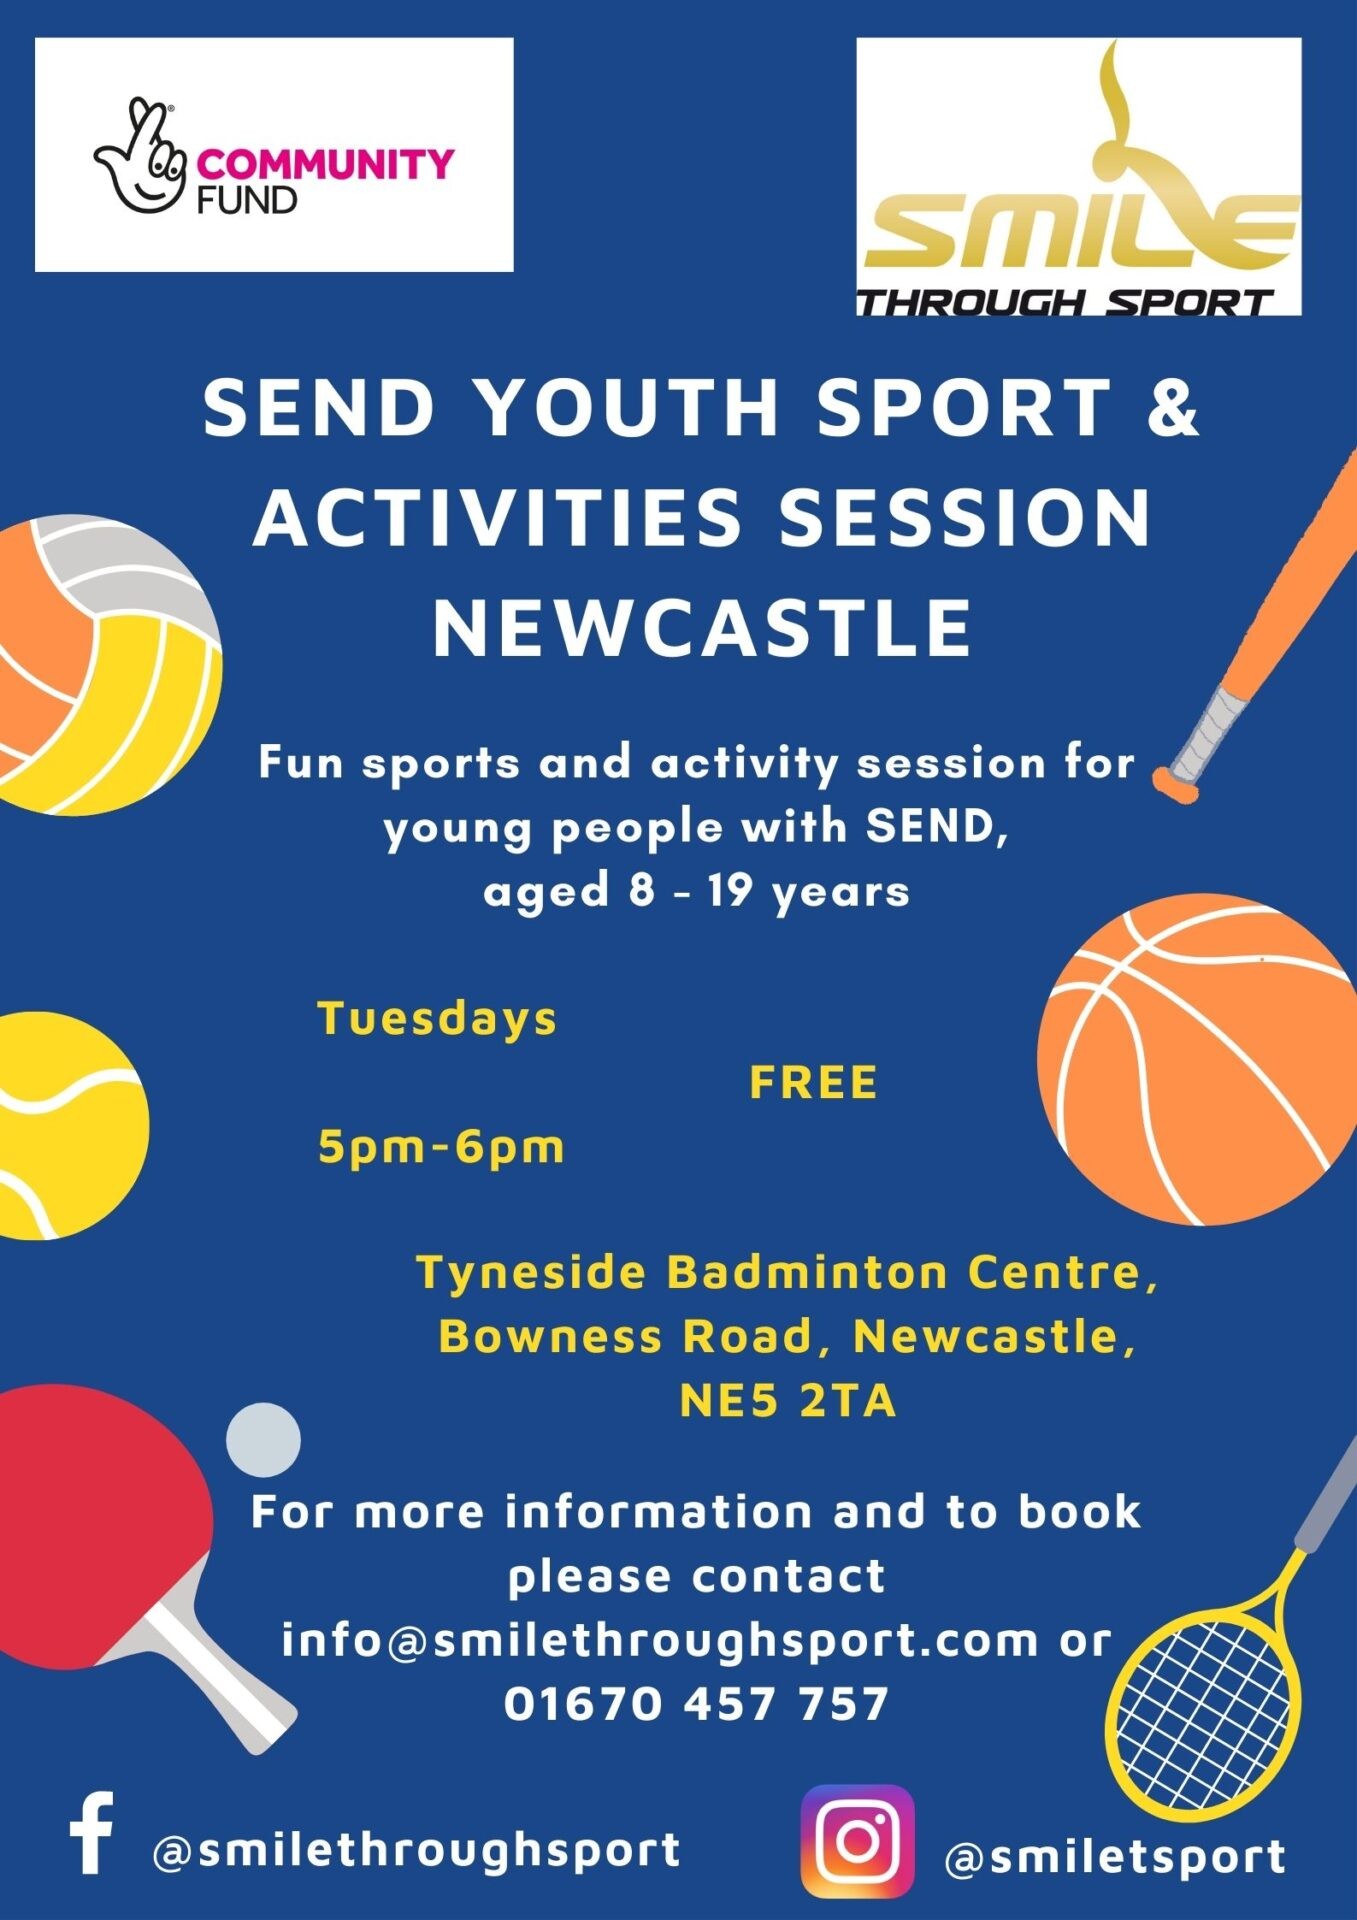 SEND Youth and Sport Sessions